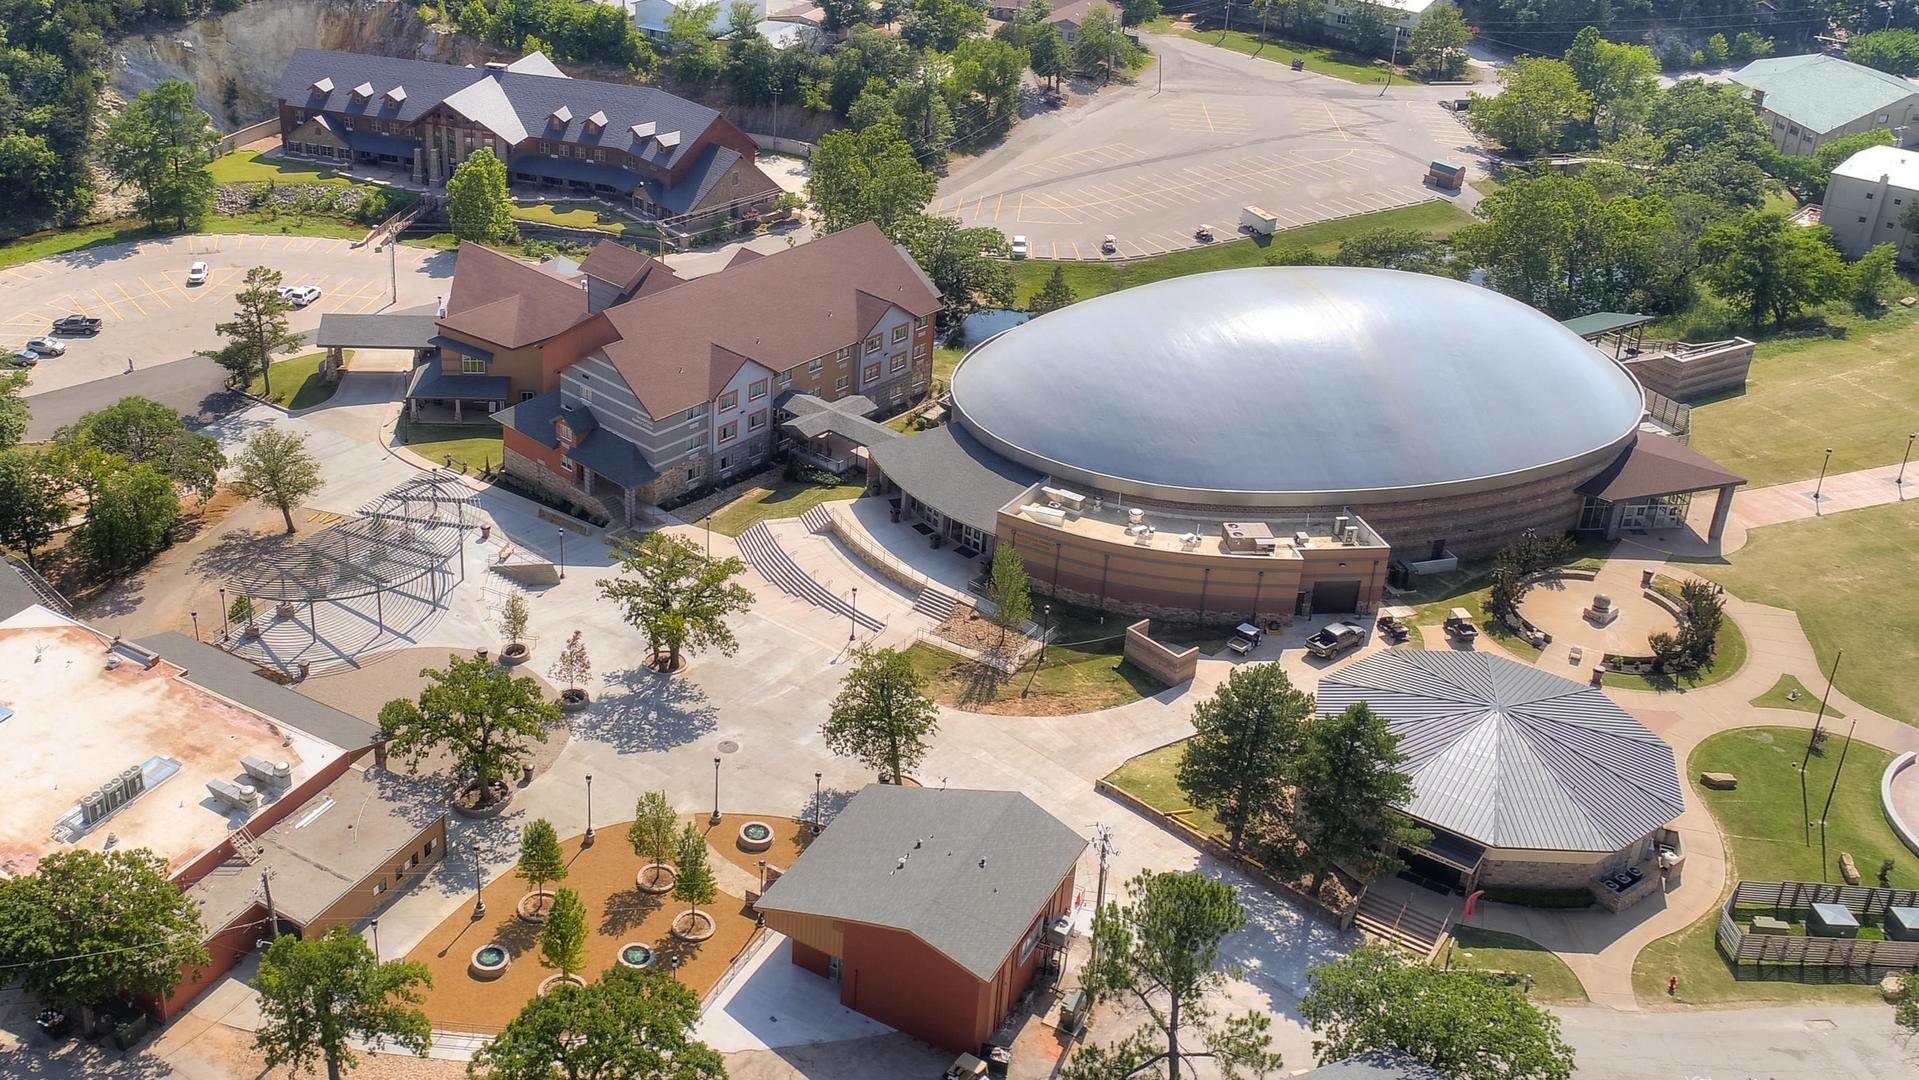 Aerial view of the Mathena Family Event Center